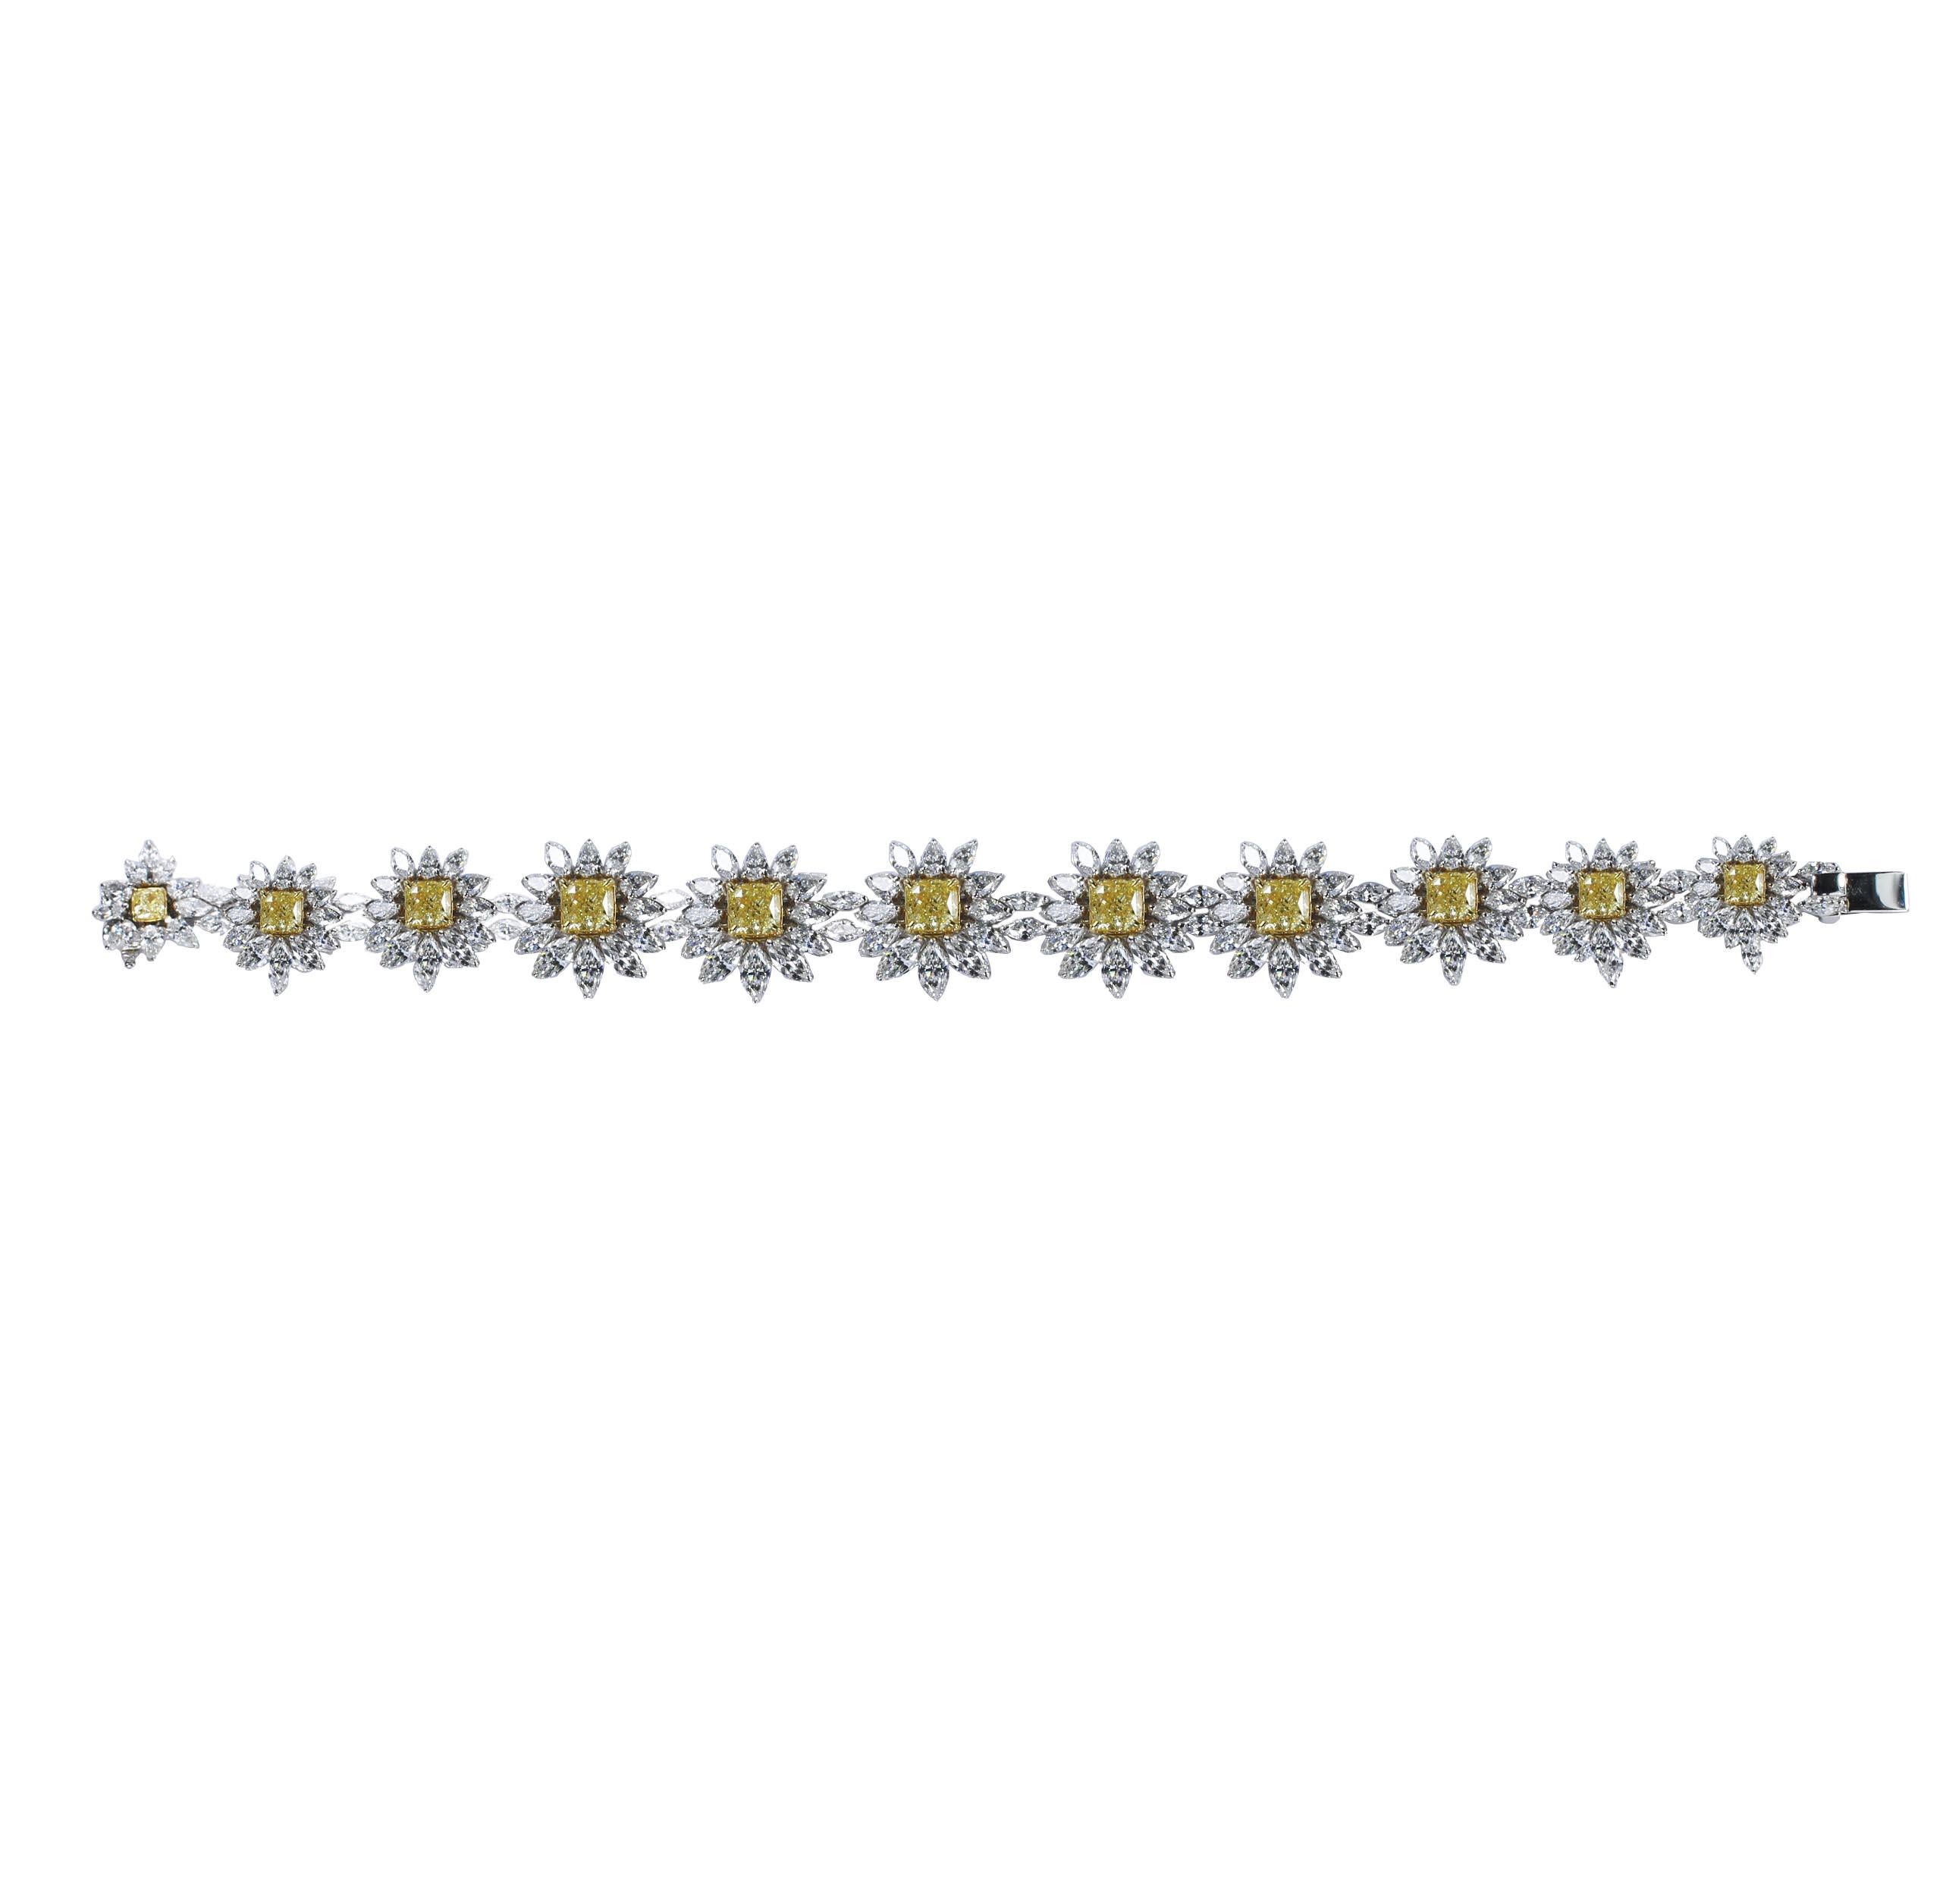 Yellow cushion cut and white diamonds Tennis Bracelet

Bask in the luxuriousness of this bracelet in 18K white gold and yellow gold adorned beautifully with rare cushion cut yellow diamonds and sparkling white marquise and pear shaped diamonds in a